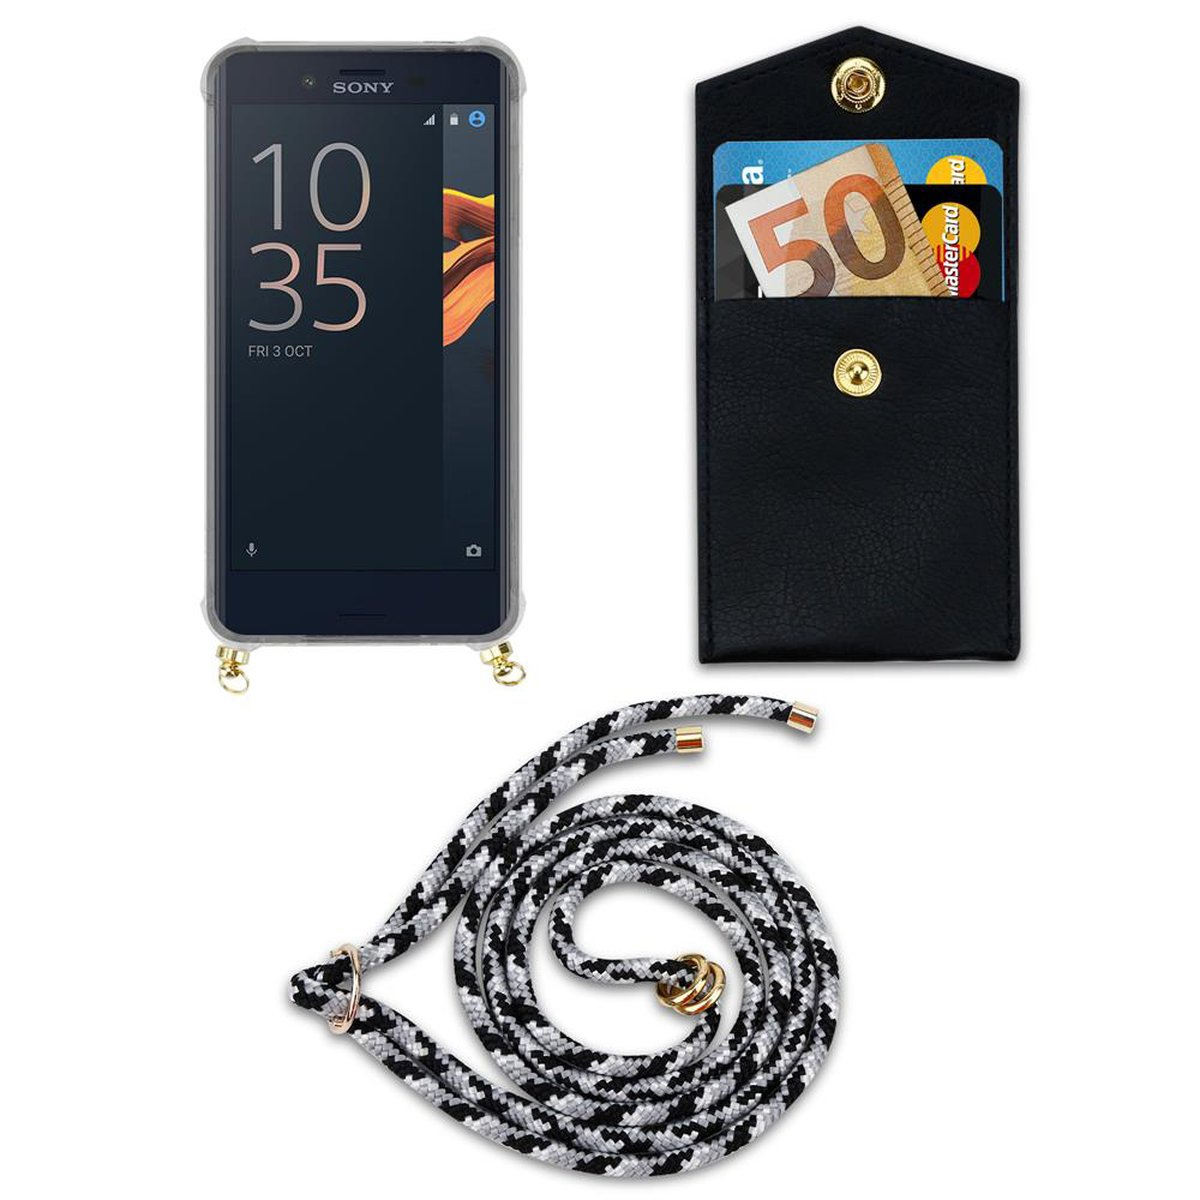 X SCHWARZ CAMOUFLAGE Handy Backcover, Gold und CADORABO Kordel abnehmbarer Ringen, Band mit Hülle, Kette Sony, COMPACT, Xperia